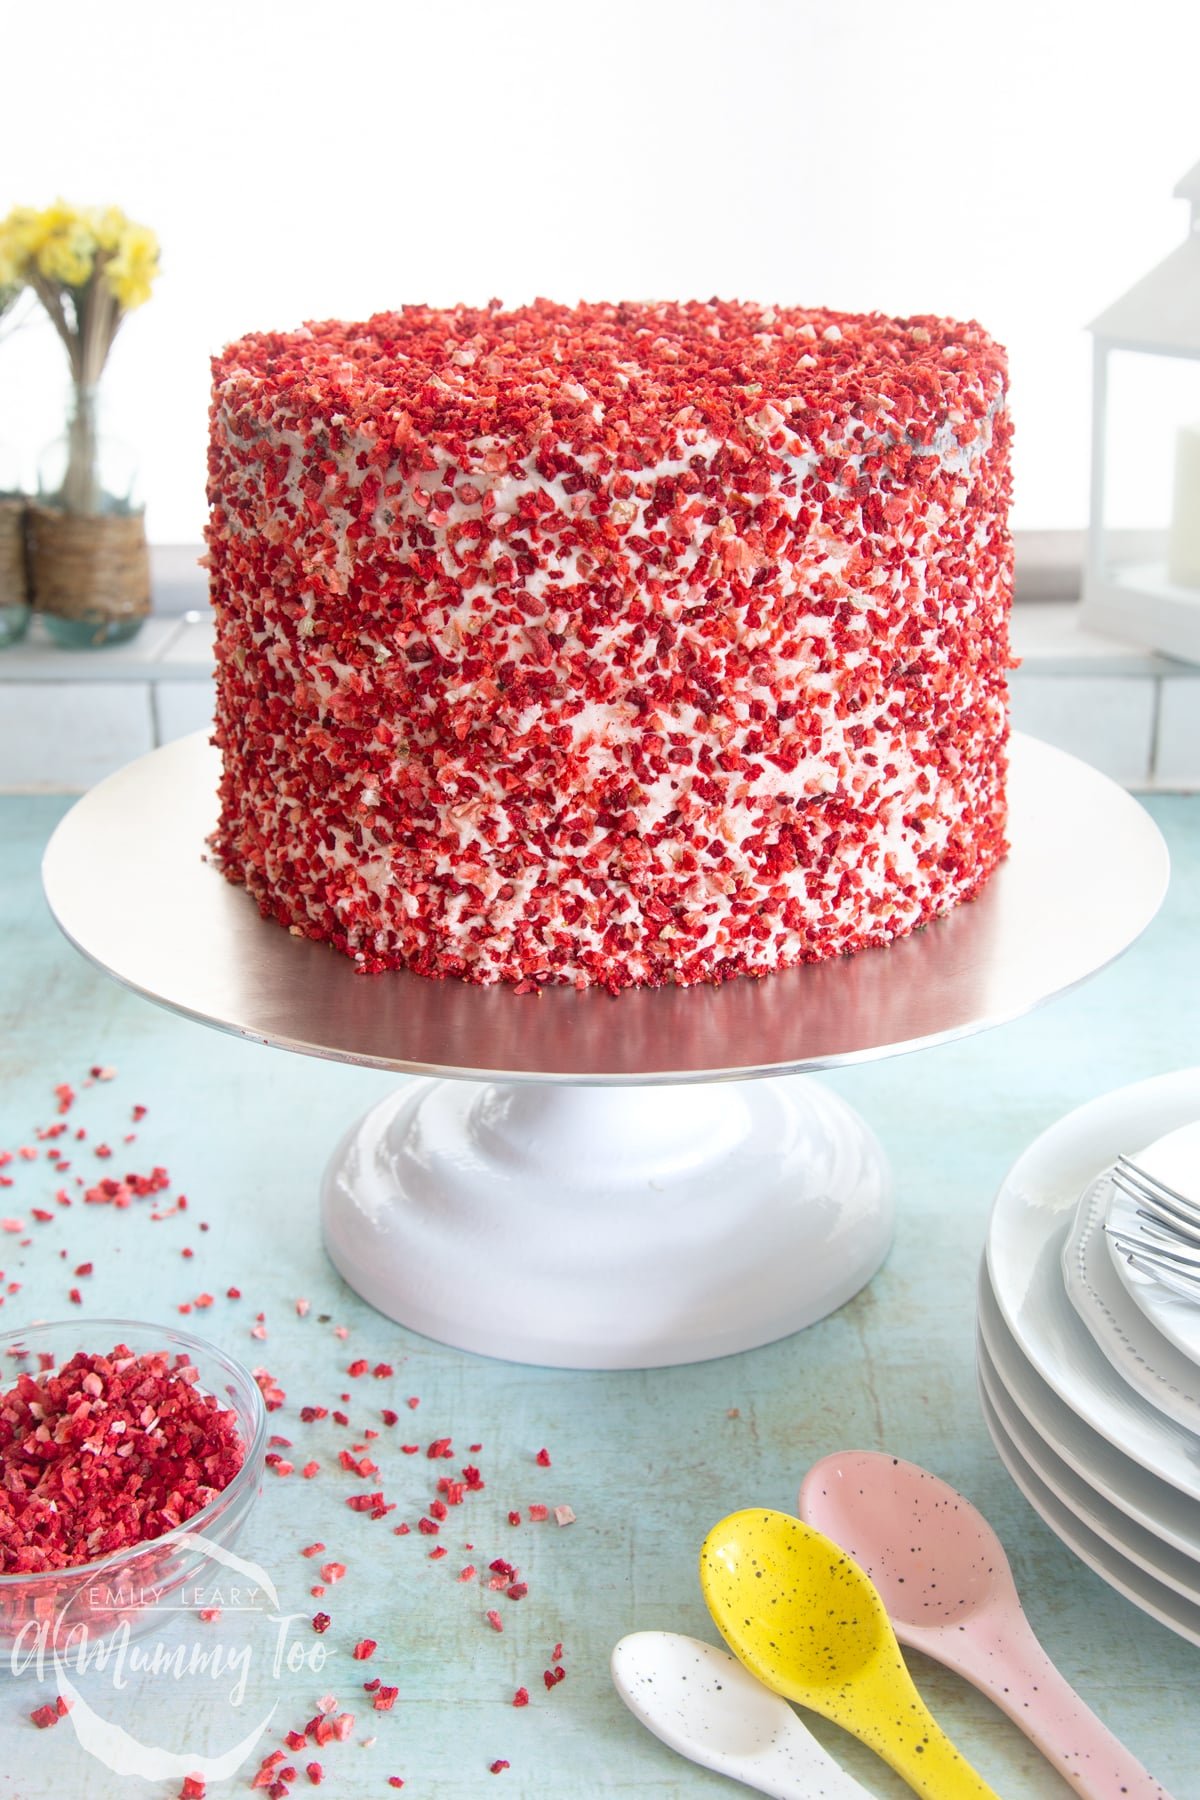 A pink ombre cake on a cake stand. The cake is covered with pale pink frosting and freeze dried strawberry pieces.